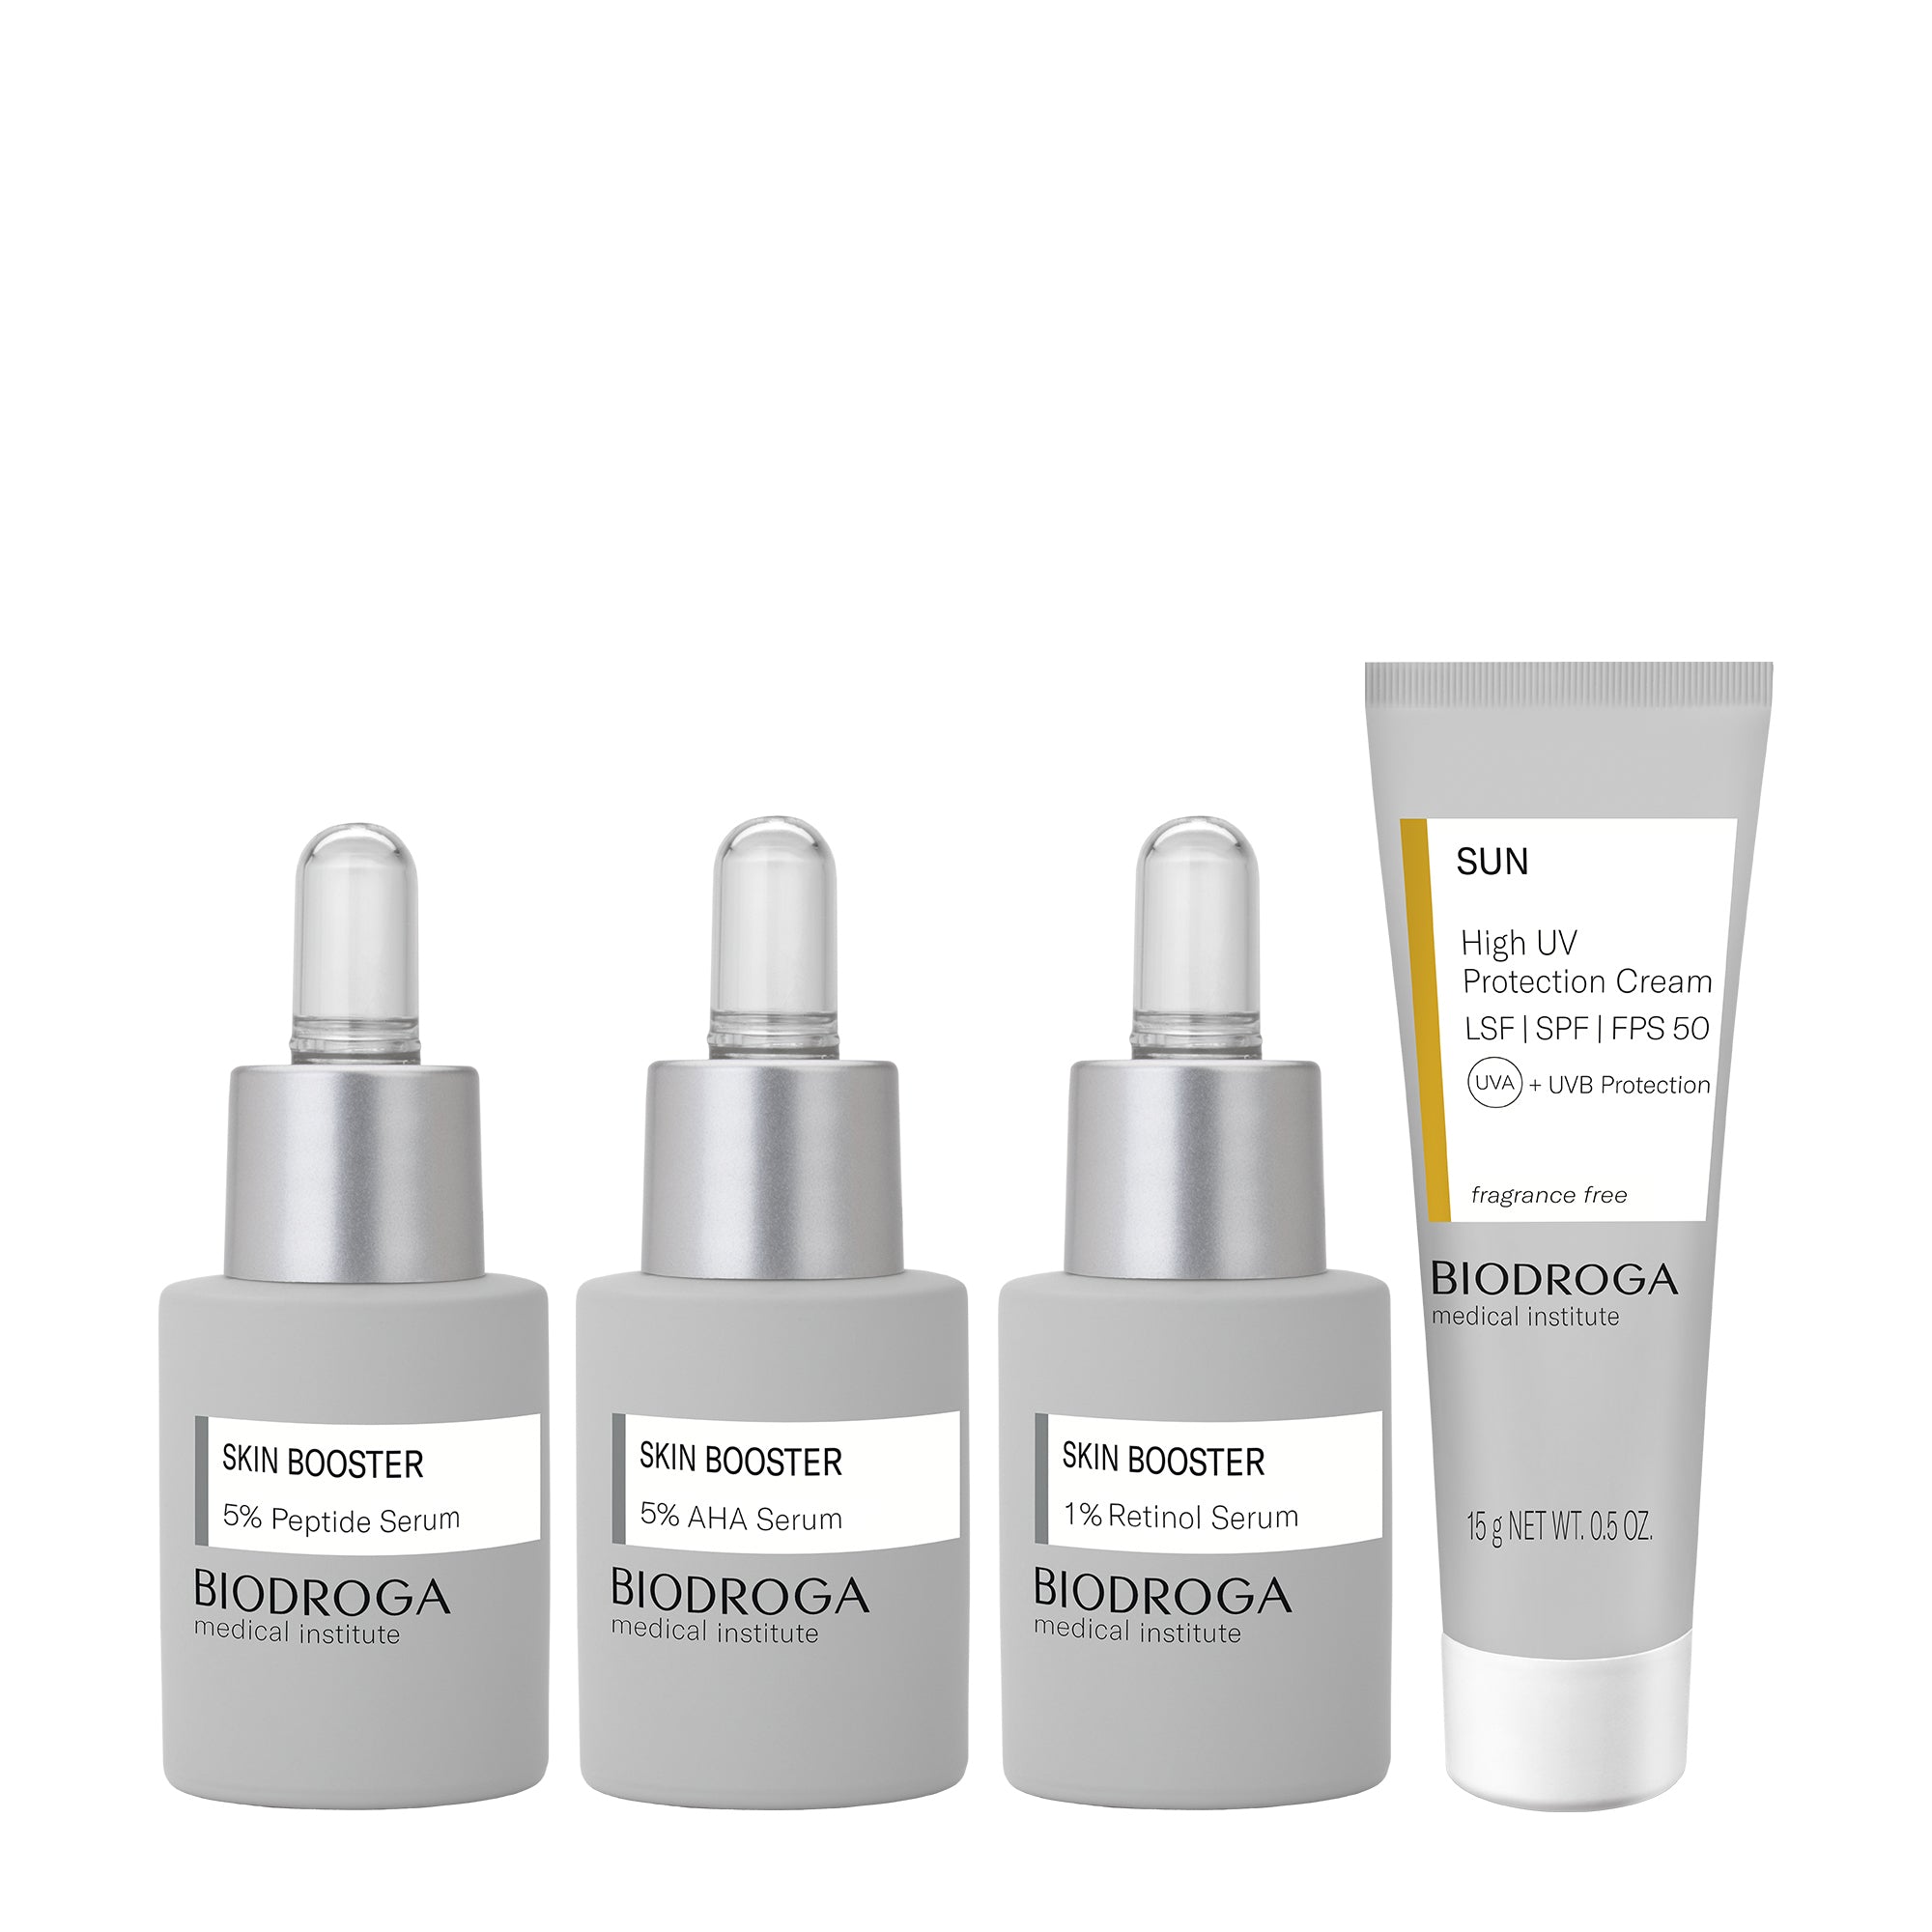 The Serum Cycling Skin Care Kit